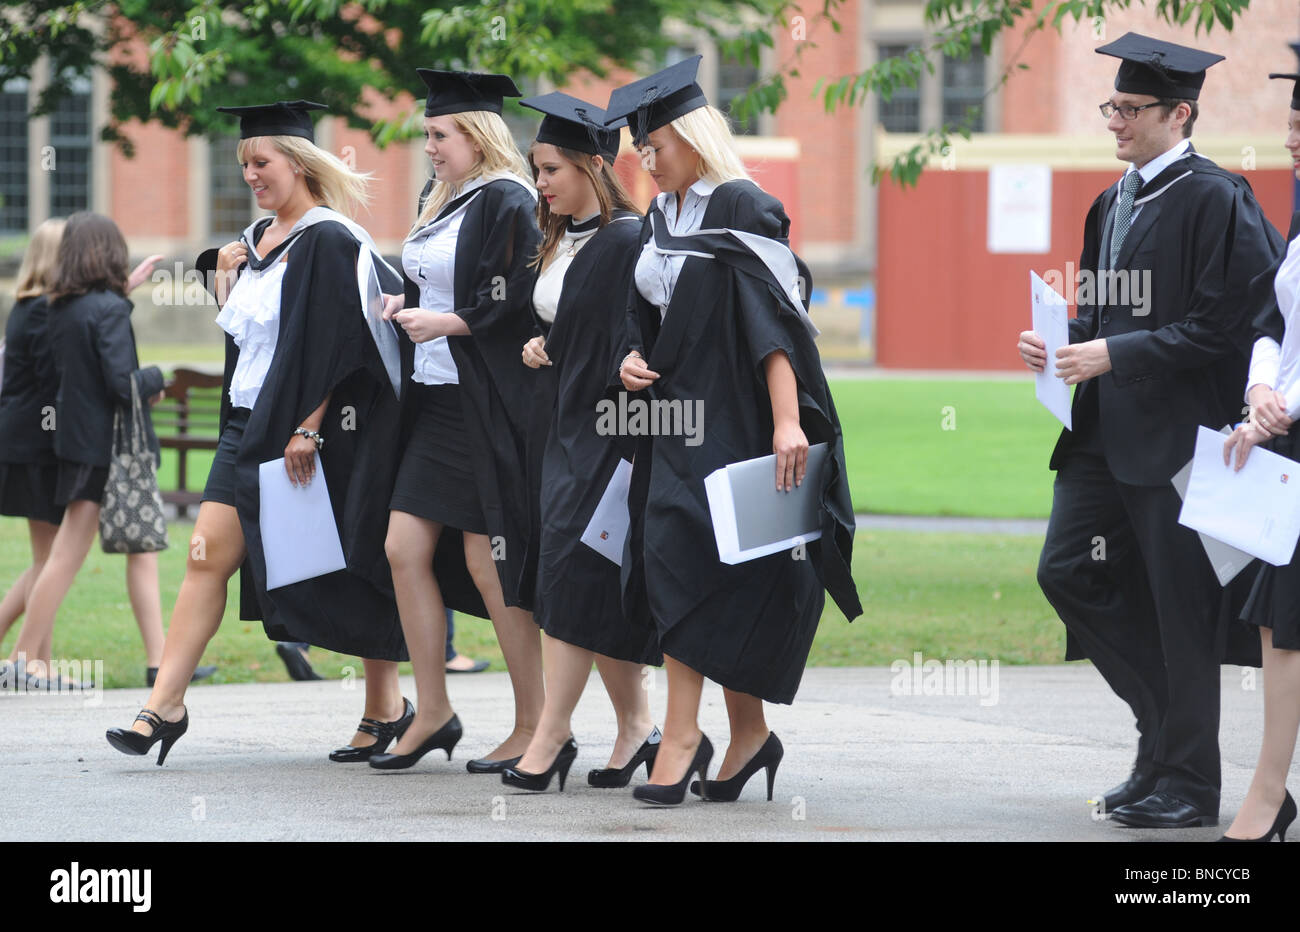 CELEBRATING GRADUATES FROM A BRITISH UNIVERSITY LEAVE THEIR GRADUATION CEREMONY WITH THEIR DEGREE CERTIFICATES,UK Stock Photo